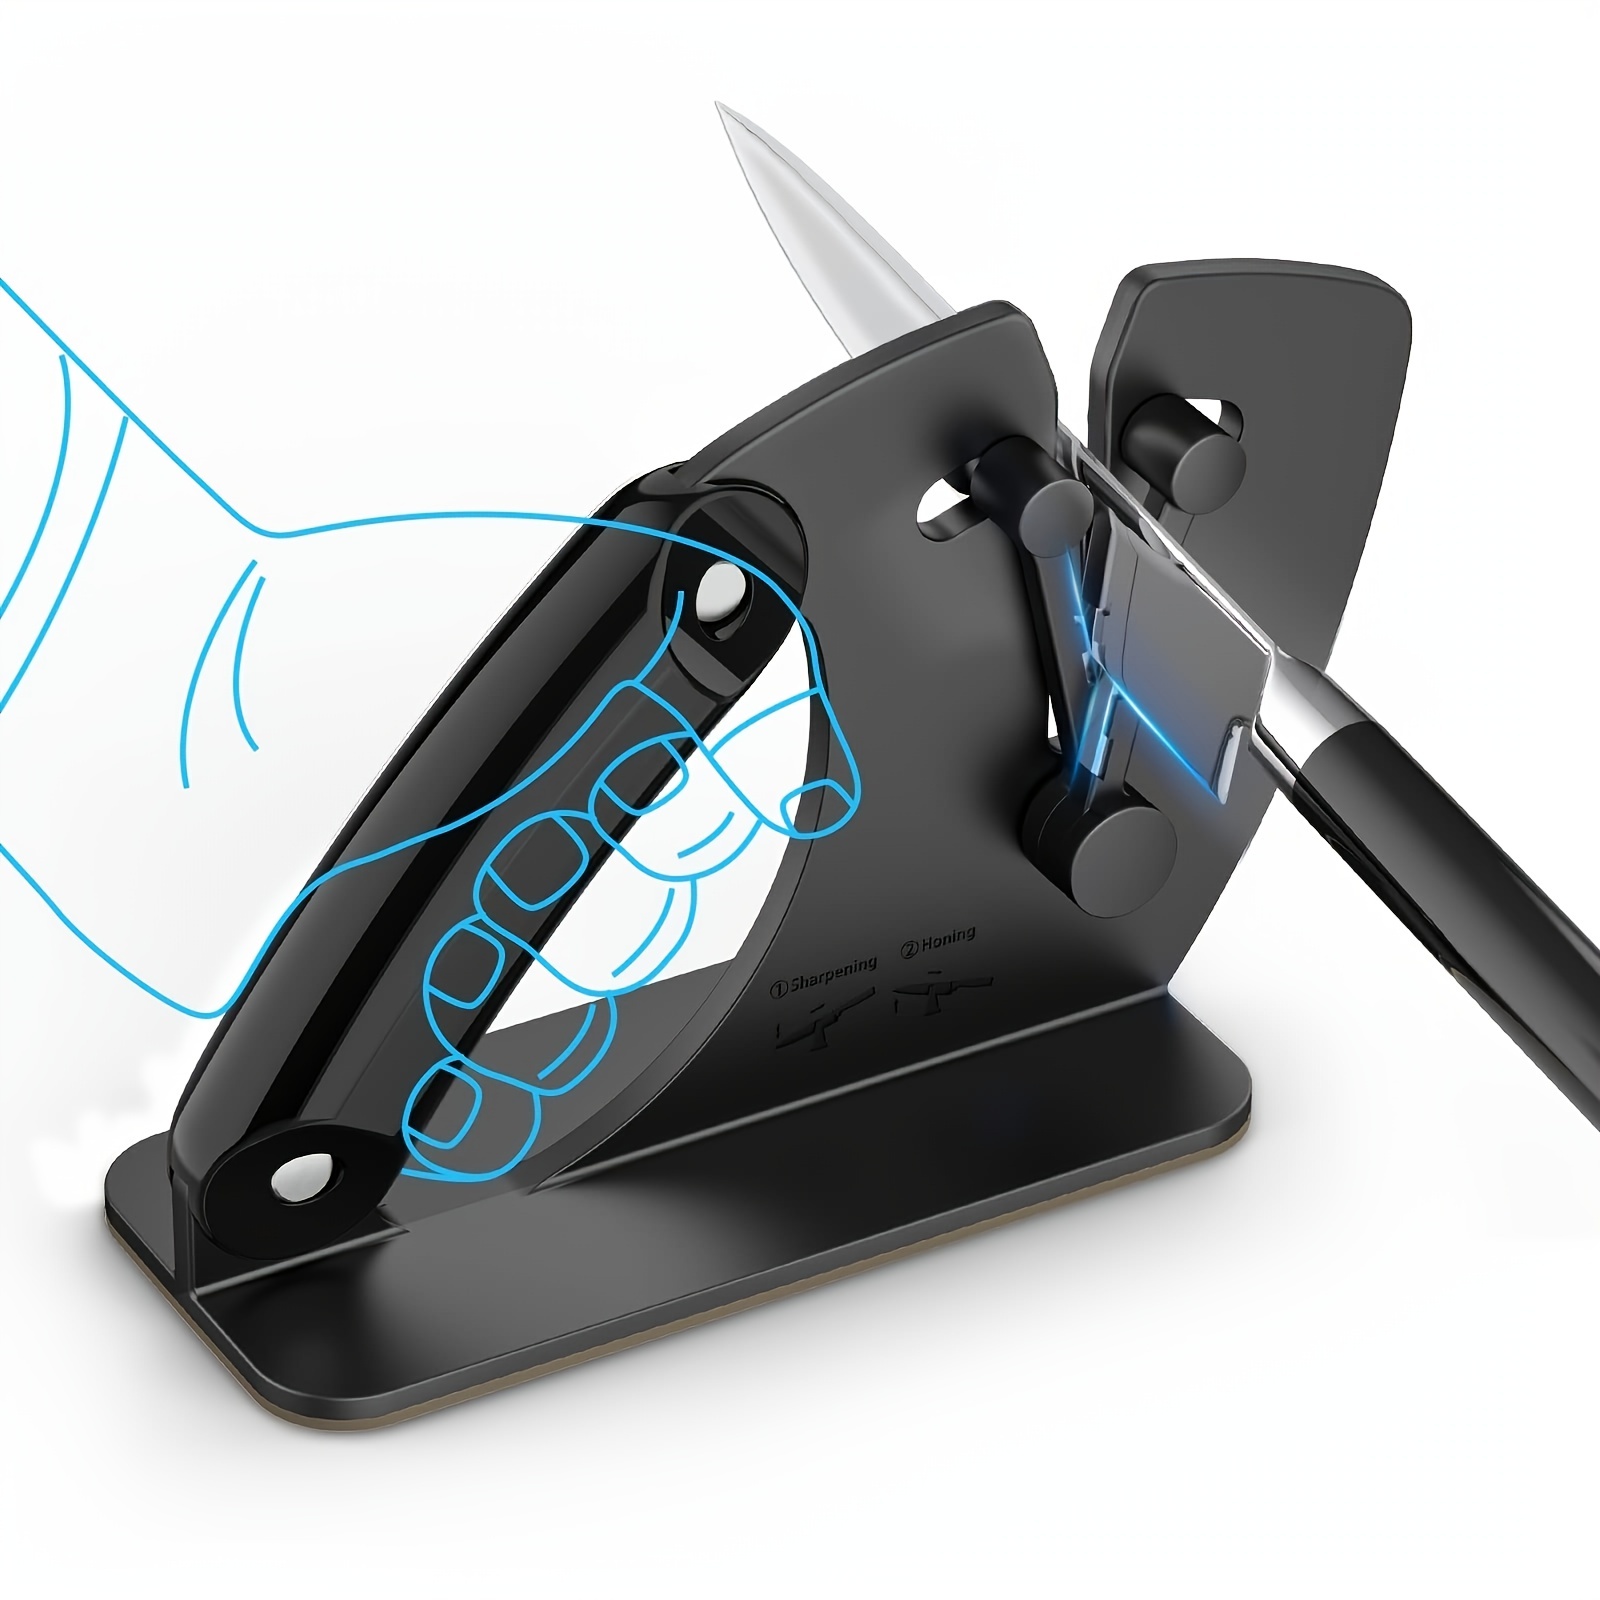 LAVEUX Professional Knife Sharpener Stainless Steel with Tungsten and  Ceramic Coarse and Fine Honing. Revive Even the Dullest Knives Quickly and  Easily. For All Straight Steel and Serrated Blades. - Ben's Discount